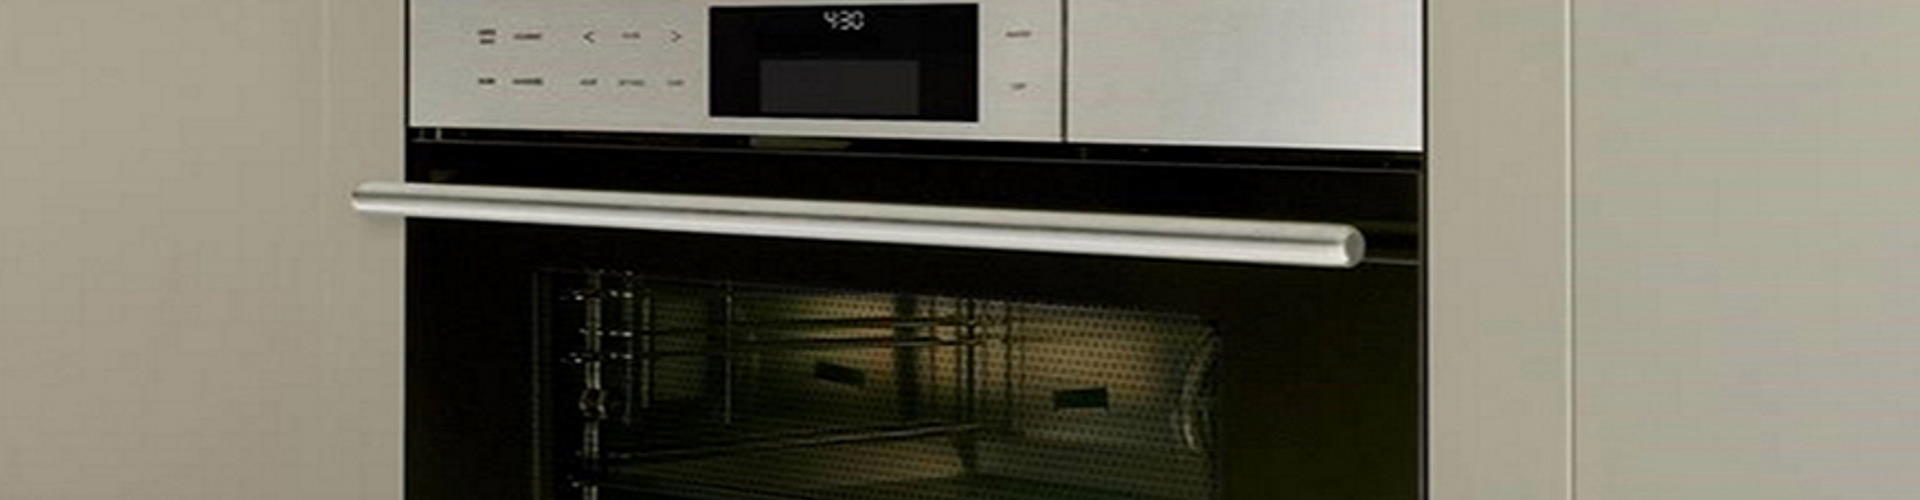 Learn more about common oven issues